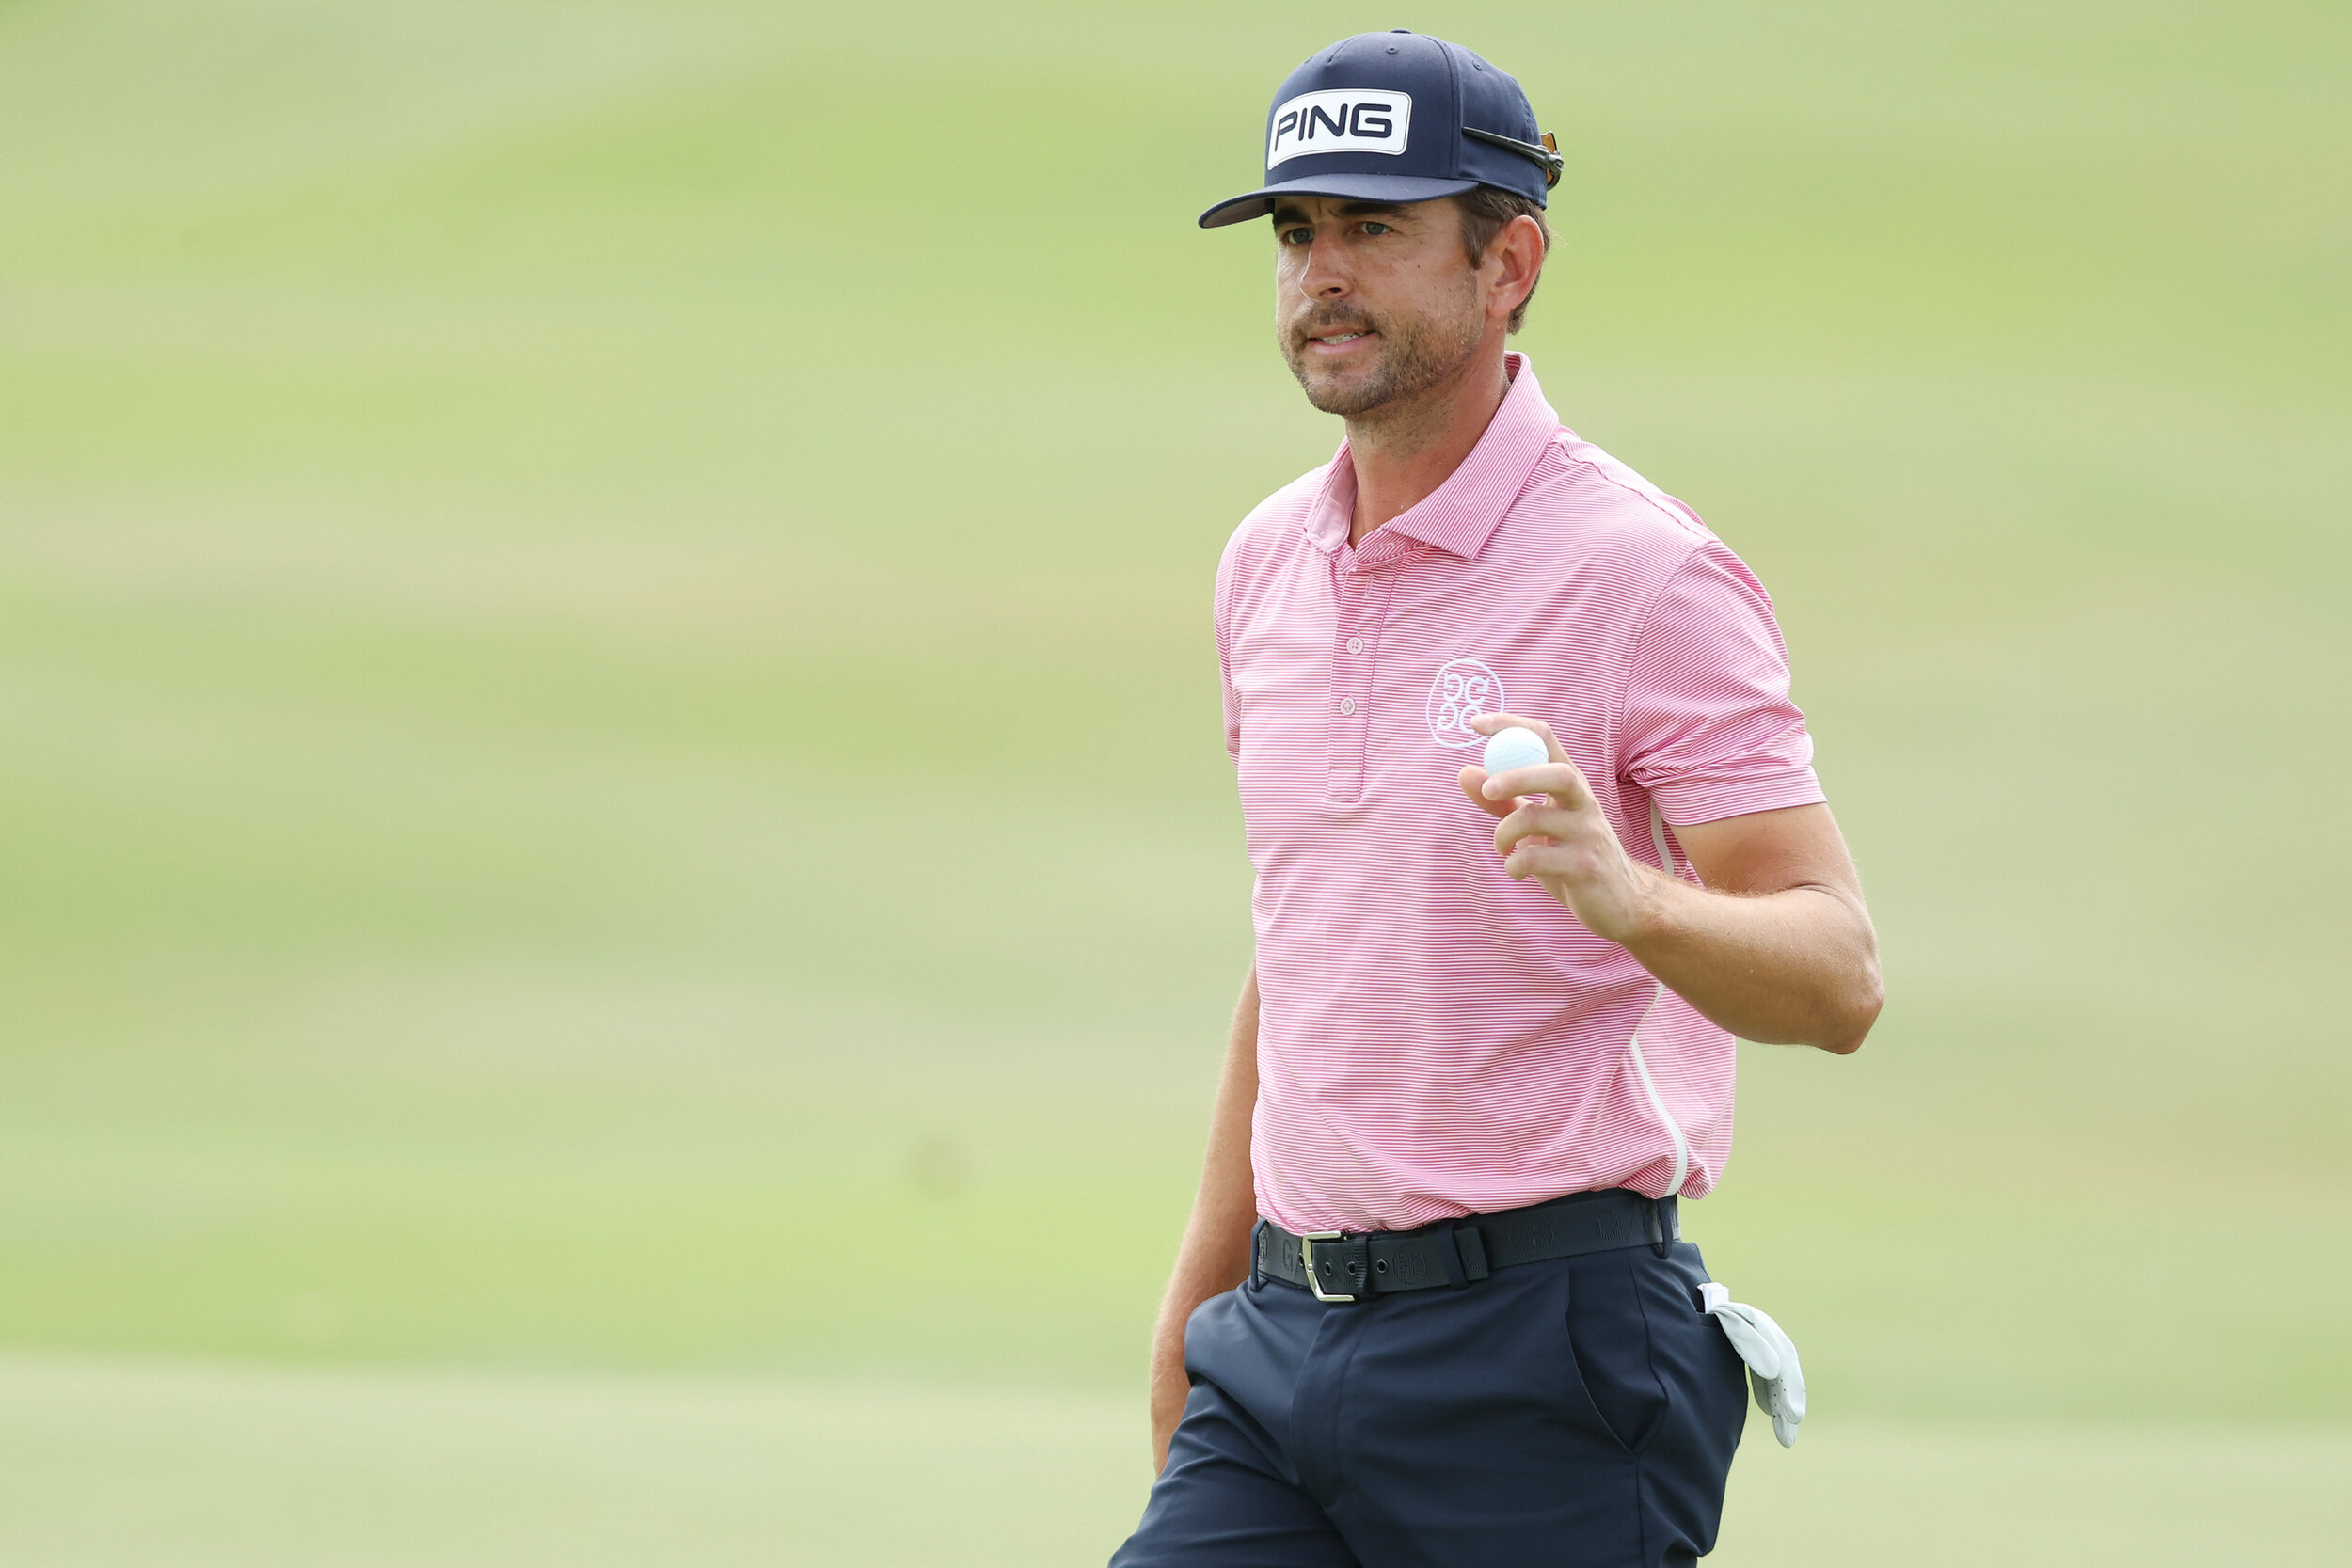  PALM BEACH GARDENS, FLORIDA - MARCH 19: Scott Harrington of the United States reacts on the ninth green during the second round of The Honda Classic at PGA National Champion course on March 19, 2021 in Palm Beach Gardens, Florida. (Photo by Cliff Ha